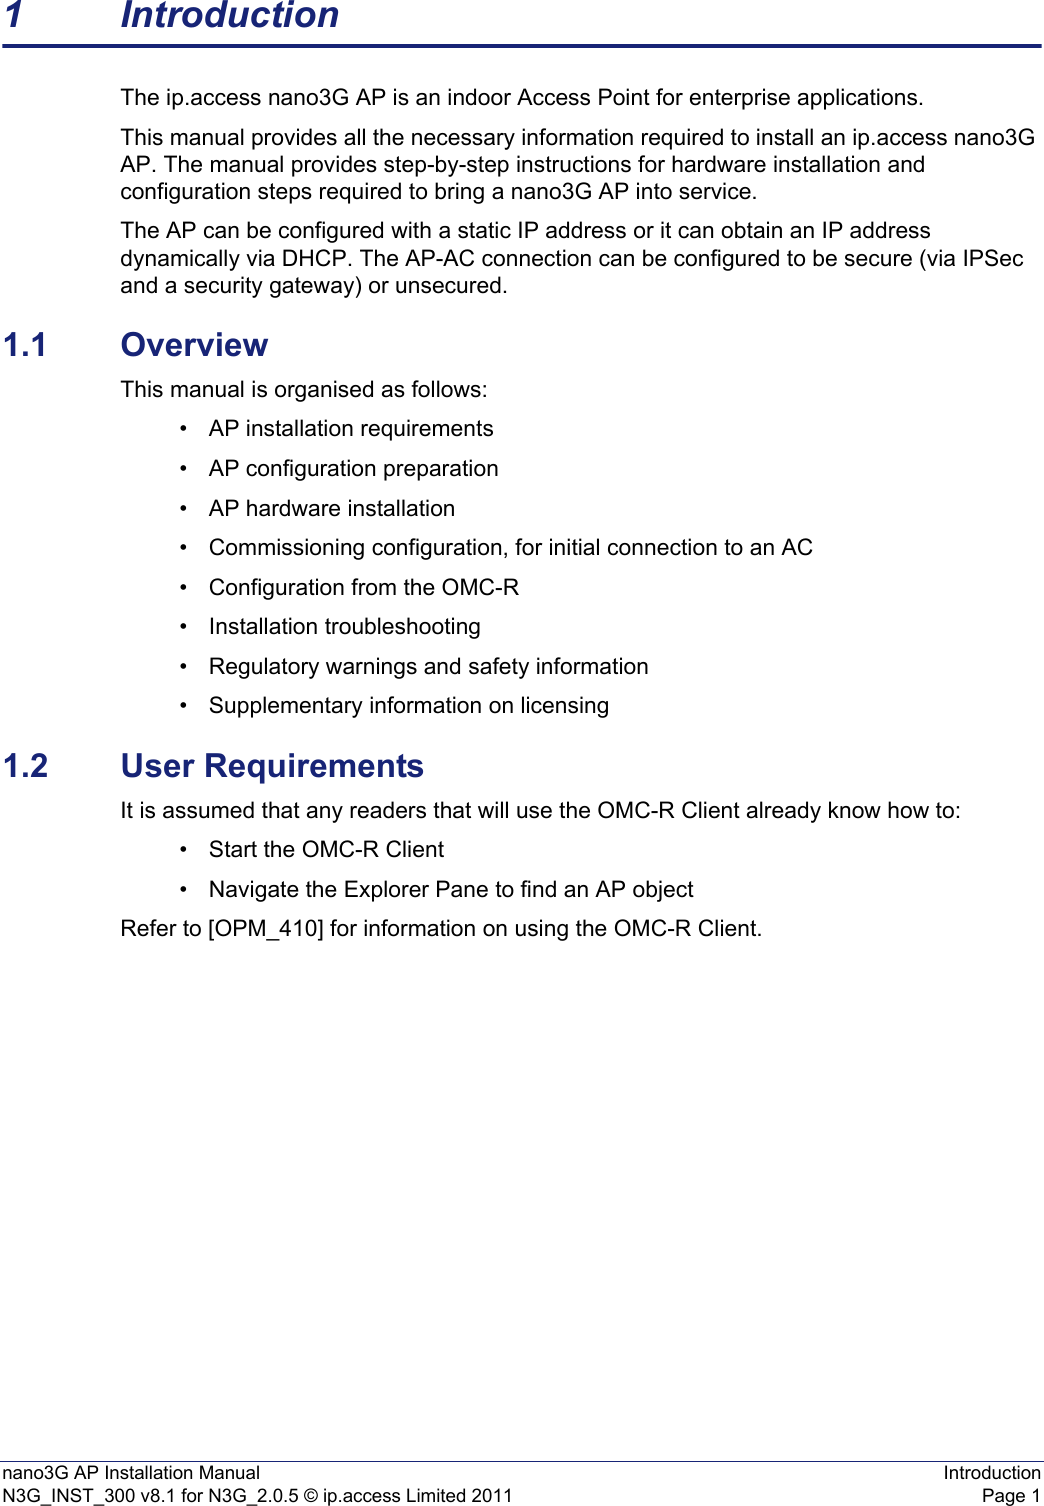 nano3G AP Installation Manual IntroductionN3G_INST_300 v8.1 for N3G_2.0.5 © ip.access Limited 2011 Page 11 IntroductionThe ip.access nano3G AP is an indoor Access Point for enterprise applications.This manual provides all the necessary information required to install an ip.access nano3G AP. The manual provides step-by-step instructions for hardware installation and configuration steps required to bring a nano3G AP into service.The AP can be configured with a static IP address or it can obtain an IP address dynamically via DHCP. The AP-AC connection can be configured to be secure (via IPSec and a security gateway) or unsecured.1.1 OverviewThis manual is organised as follows:• AP installation requirements• AP configuration preparation• AP hardware installation• Commissioning configuration, for initial connection to an AC• Configuration from the OMC-R• Installation troubleshooting• Regulatory warnings and safety information• Supplementary information on licensing1.2 User RequirementsIt is assumed that any readers that will use the OMC-R Client already know how to:• Start the OMC-R Client• Navigate the Explorer Pane to find an AP object Refer to [OPM_410] for information on using the OMC-R Client. 